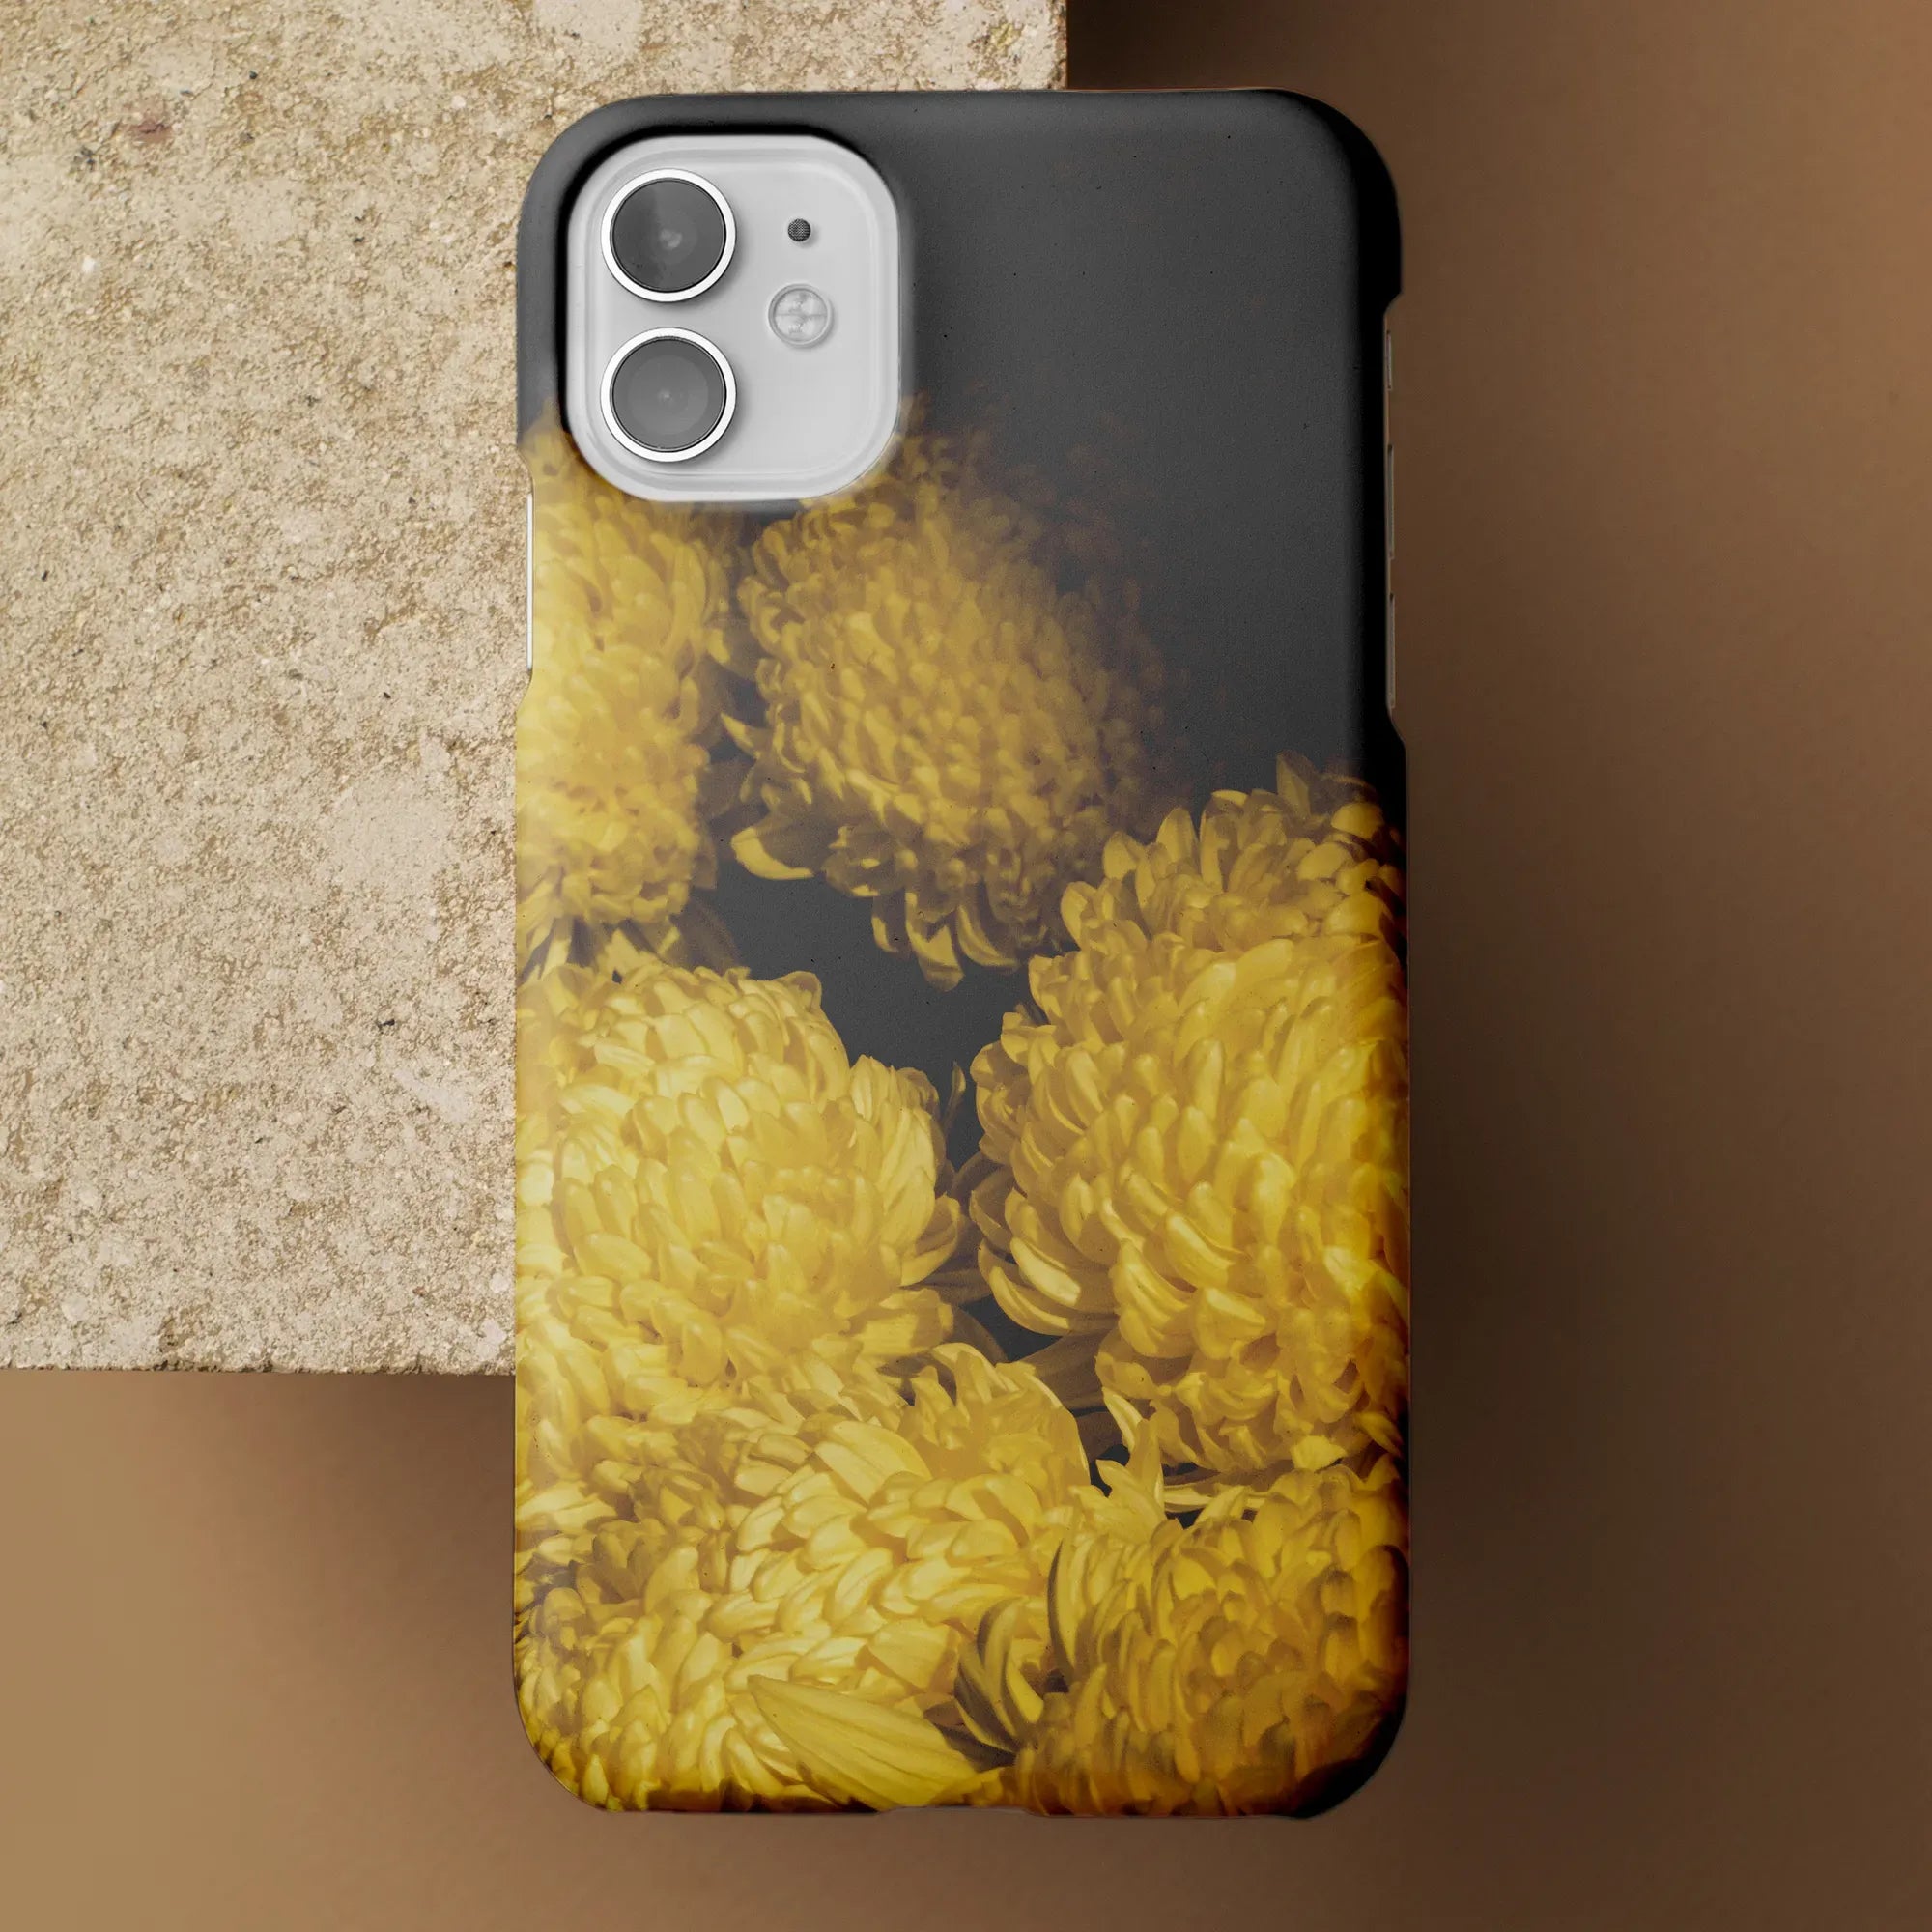 Field Of Dreams Tough Phone Case - Mobile Phone Cases - Aesthetic Art